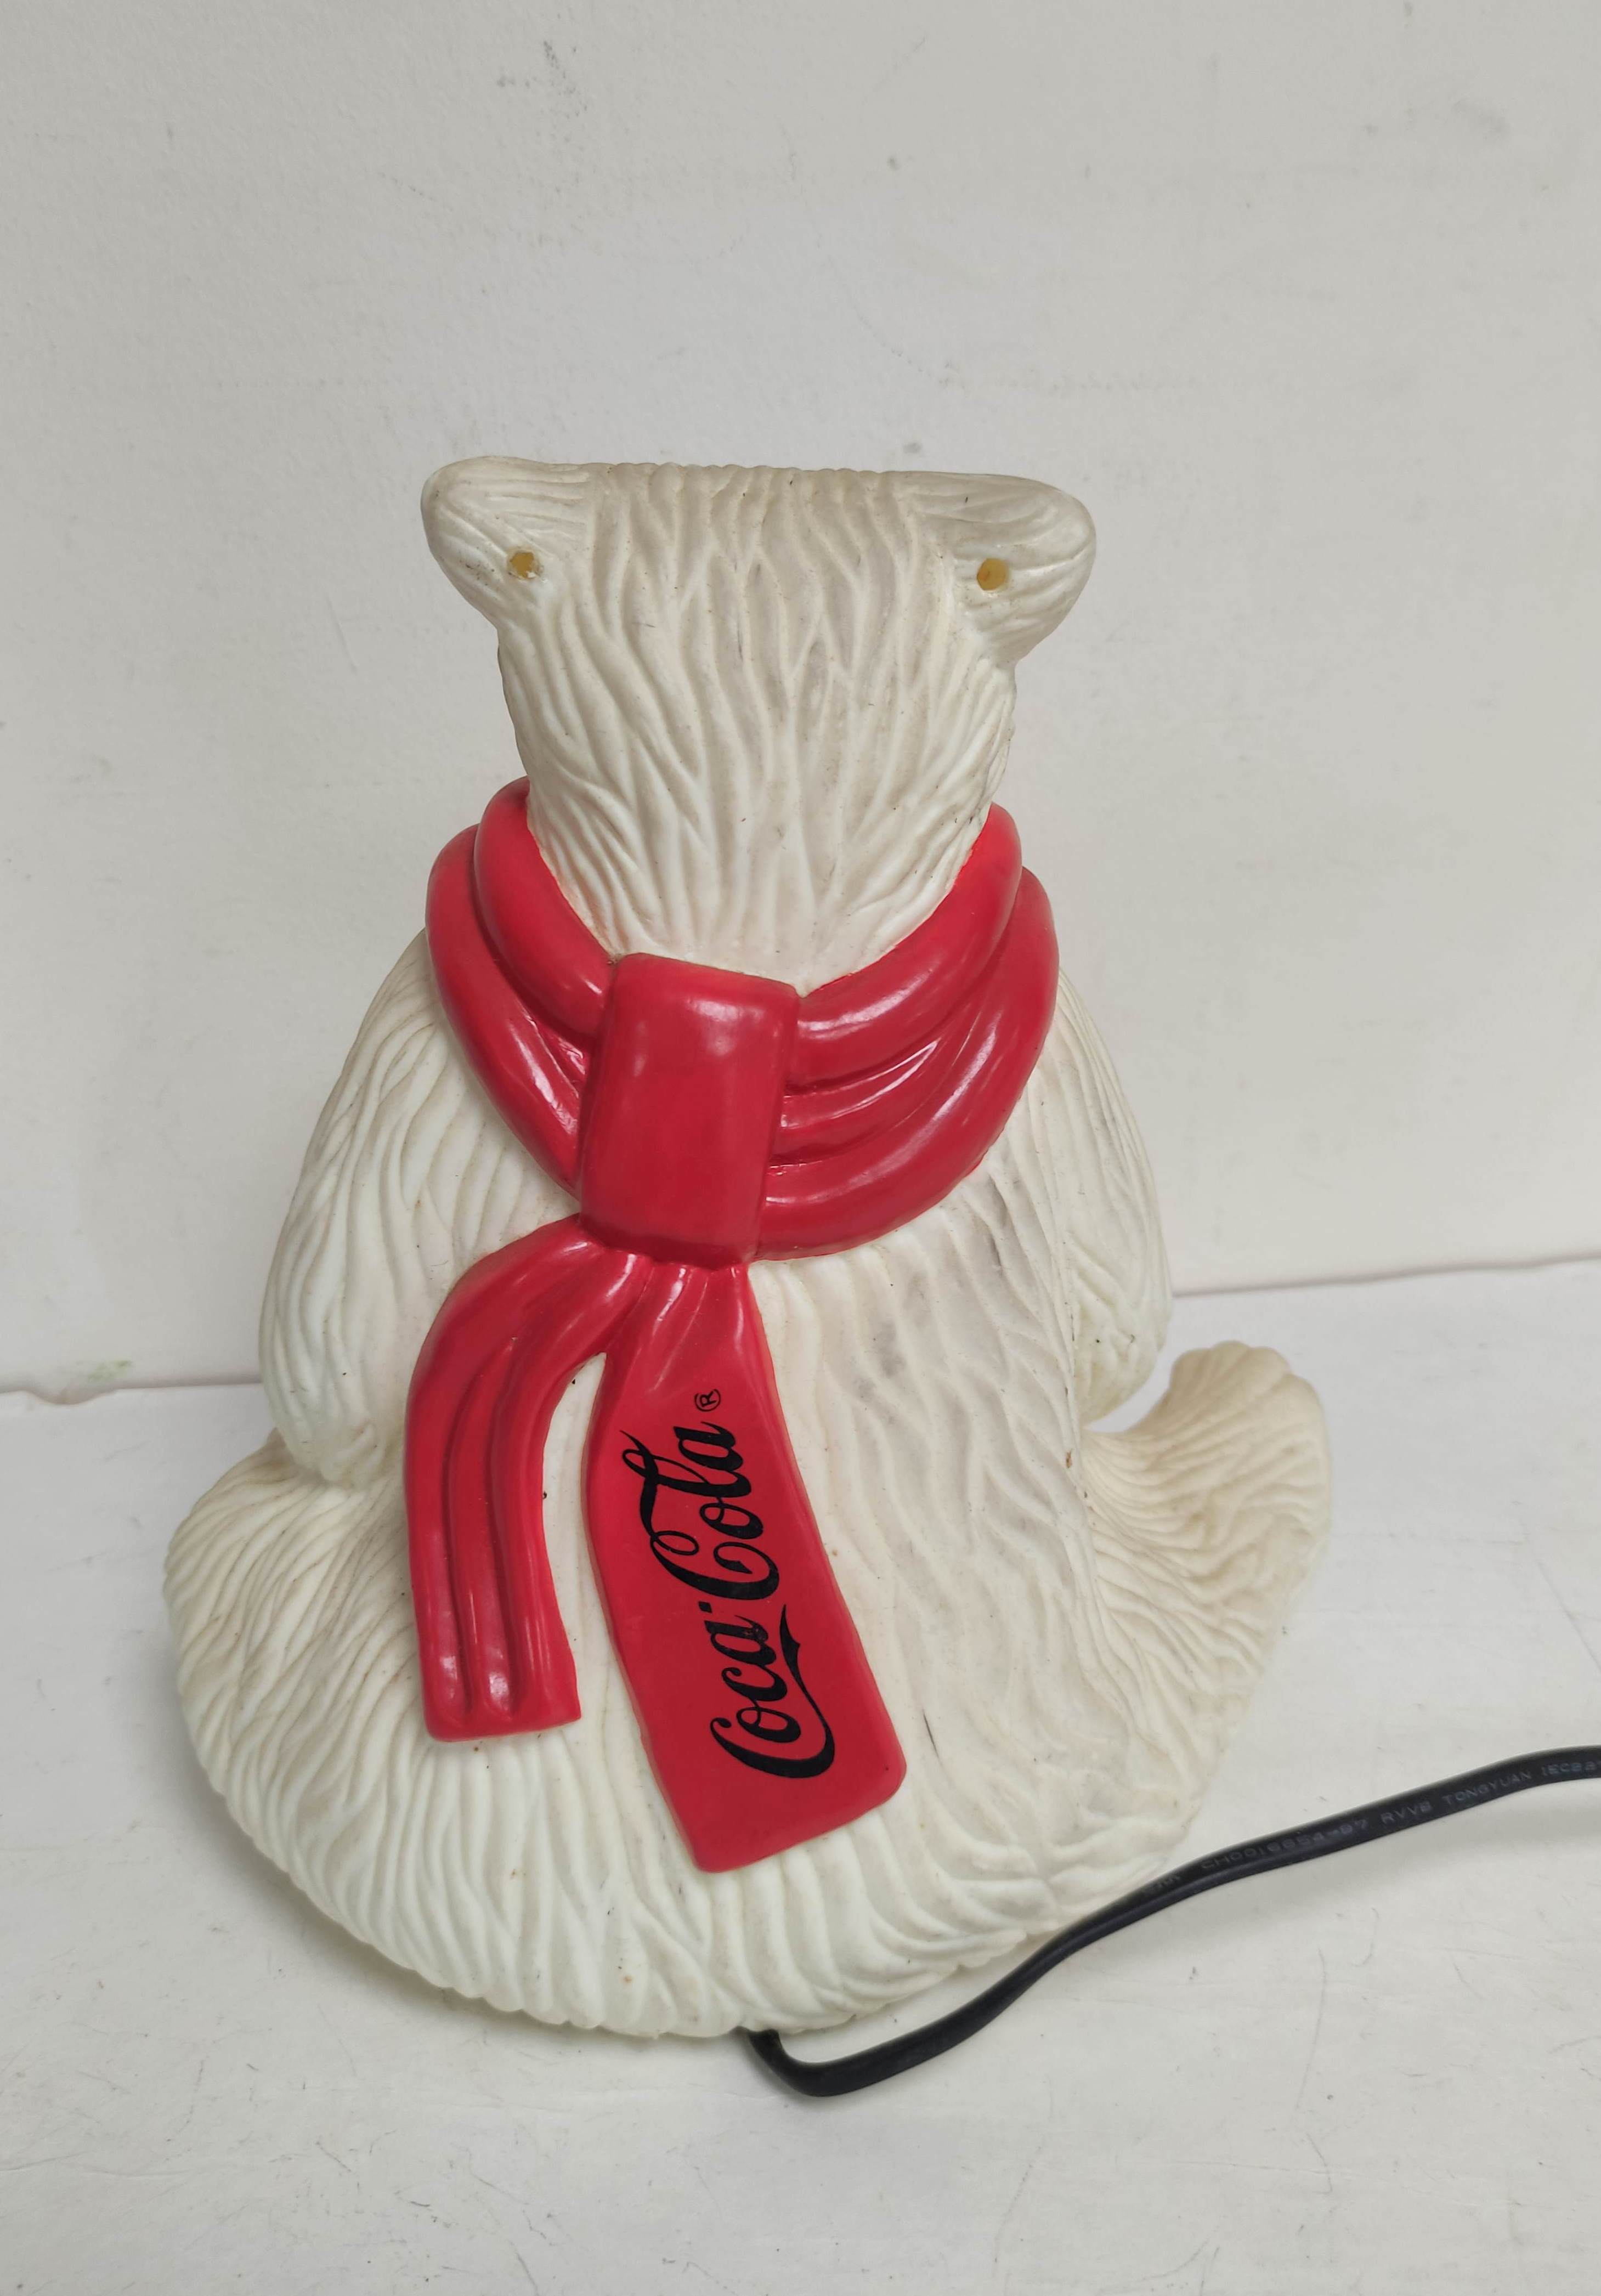 Vintage 1990s Coca Cola polar bear, 240v table lamp of plastic construction. - Image 3 of 5